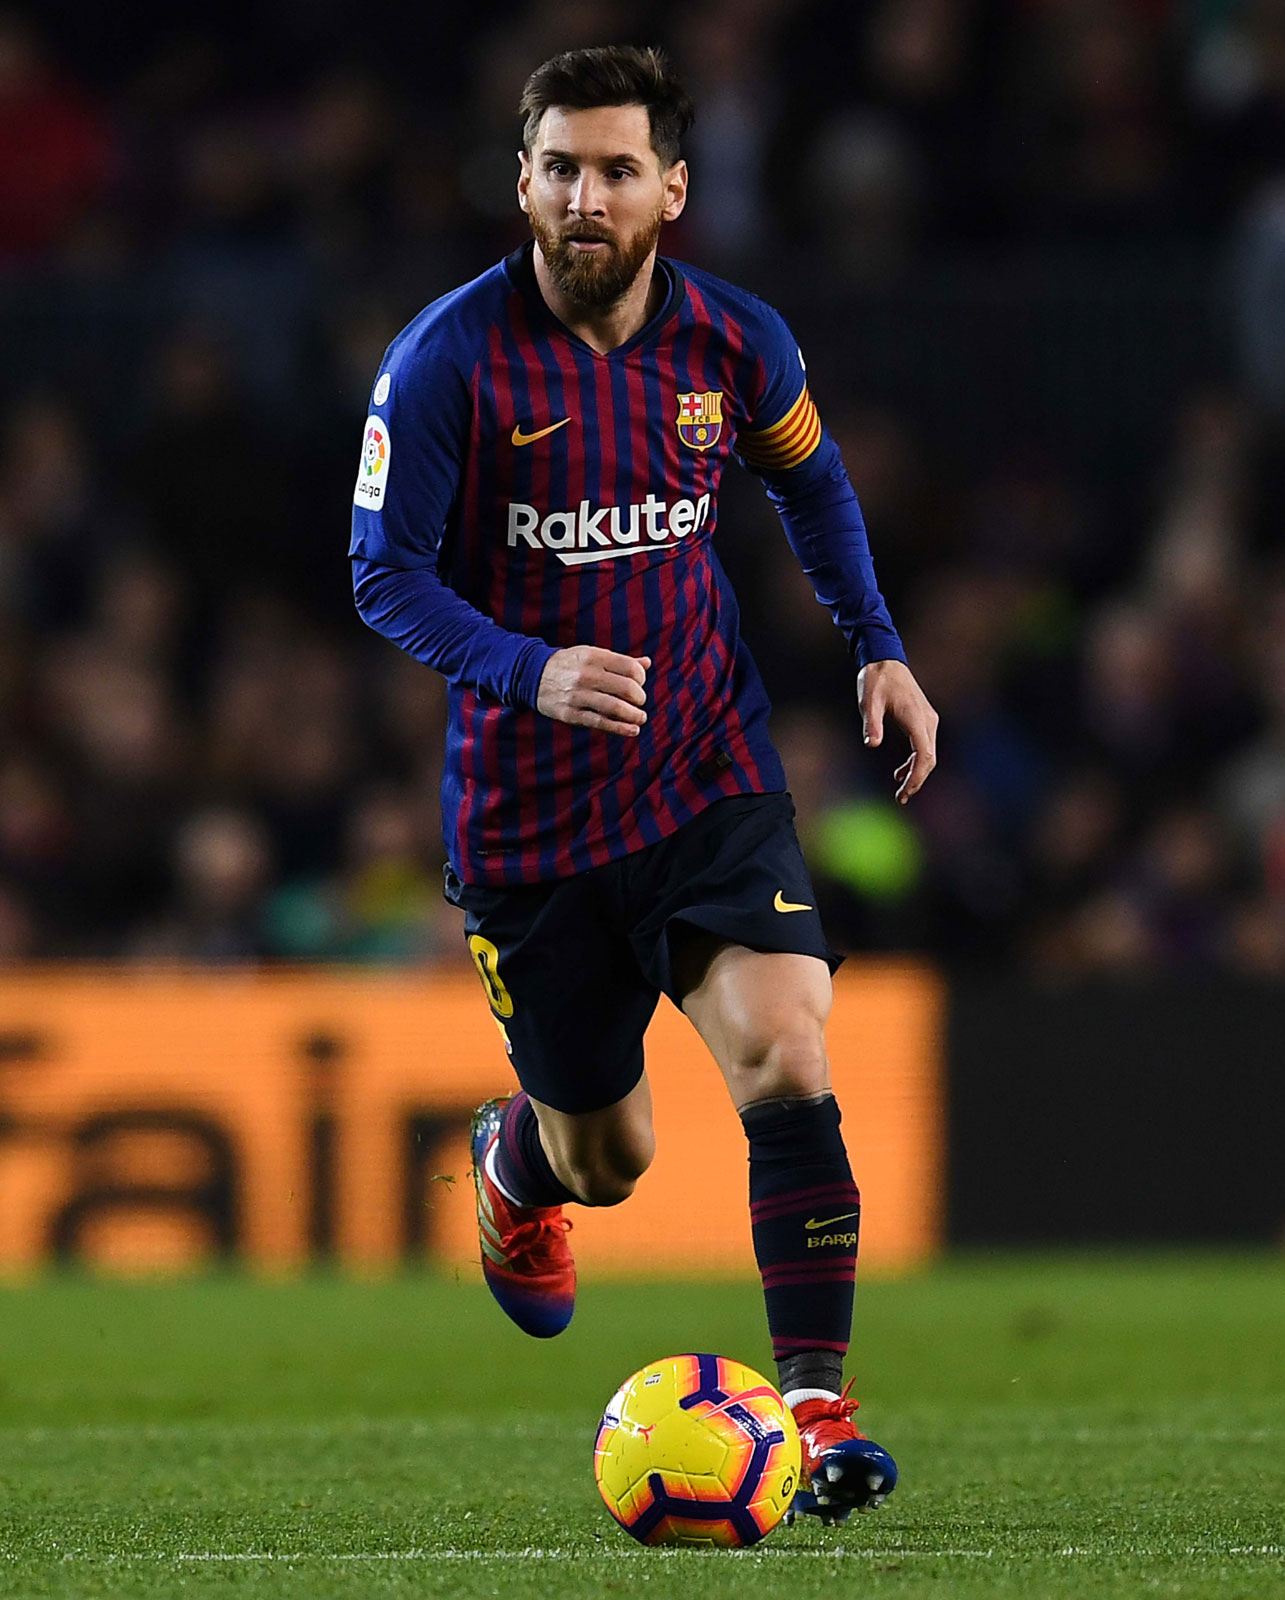 Lionel-Messi-brandnewsday World’s Five Highest Paid Football Players Lost $173M In Market Value, Messi Tops With A $66M Drop